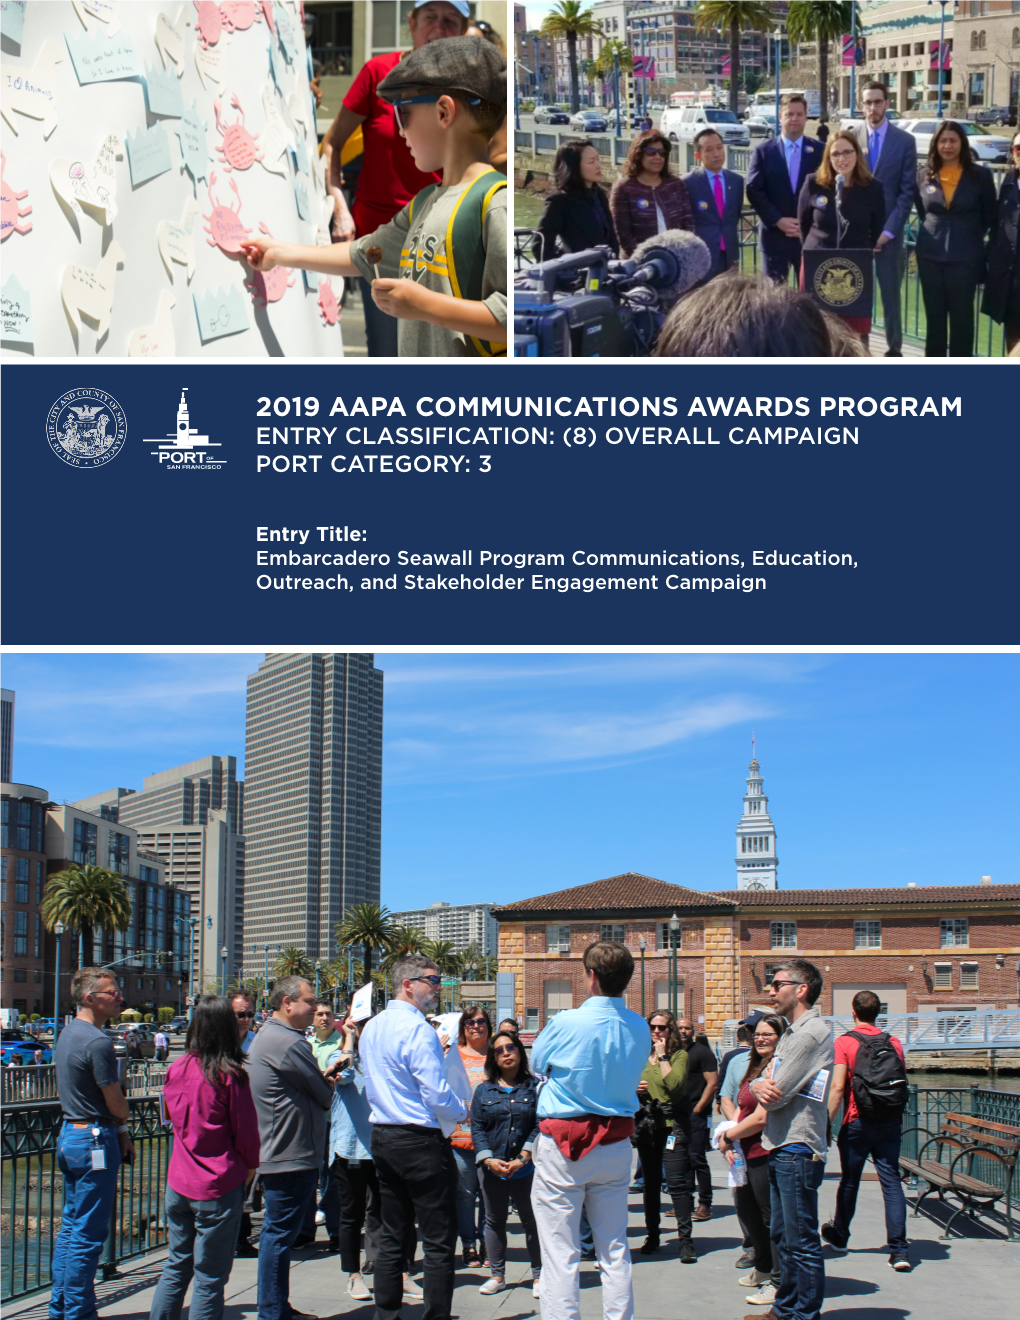 Embarcadero Seawall Program Communications, Education, Outreach, and Stakeholder Engagement Campaign Sfseawall.Com @Portofsanfrancisco @Sf Port @Sfport